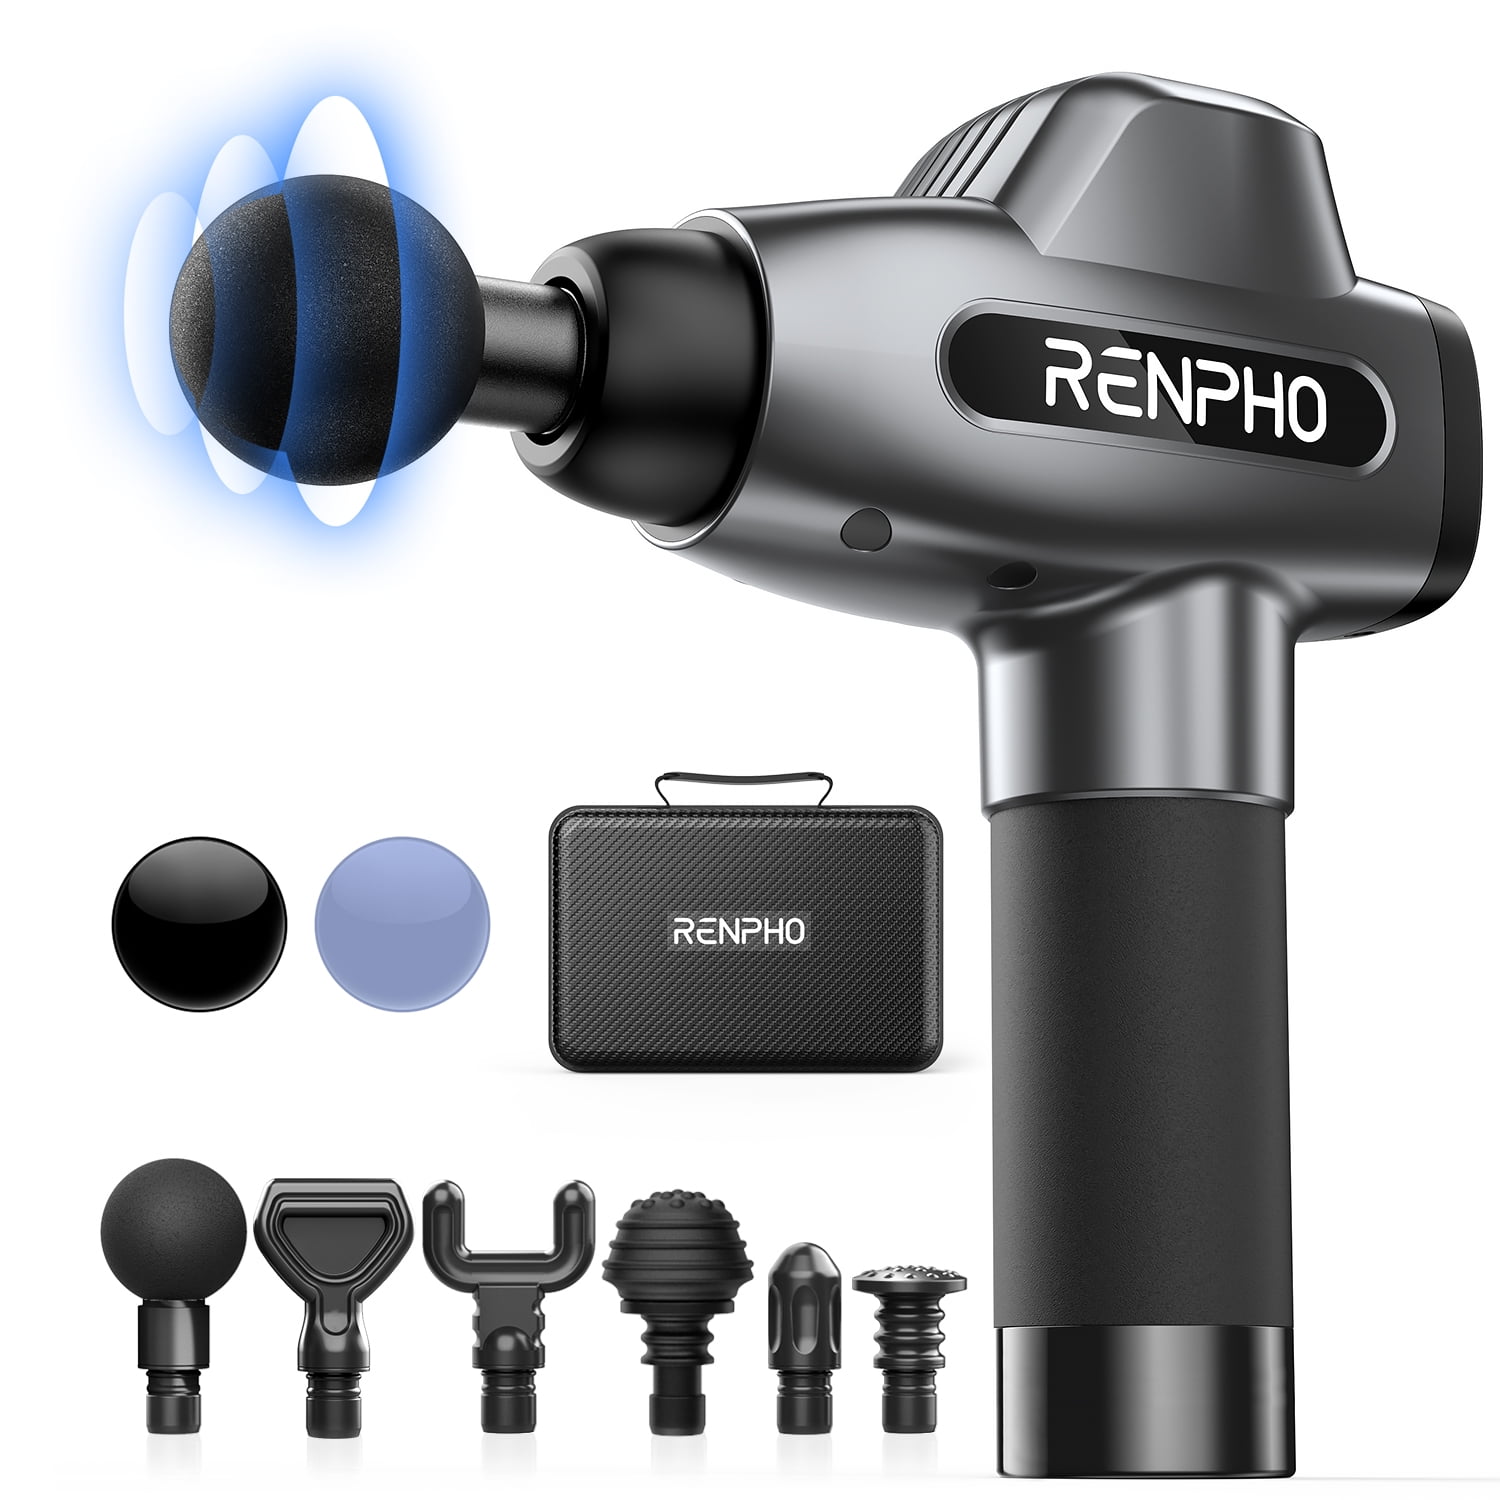 Renpho Percussion Muscle Massage Guns for Athletes Pain Relief -Black, Ideal Gifts